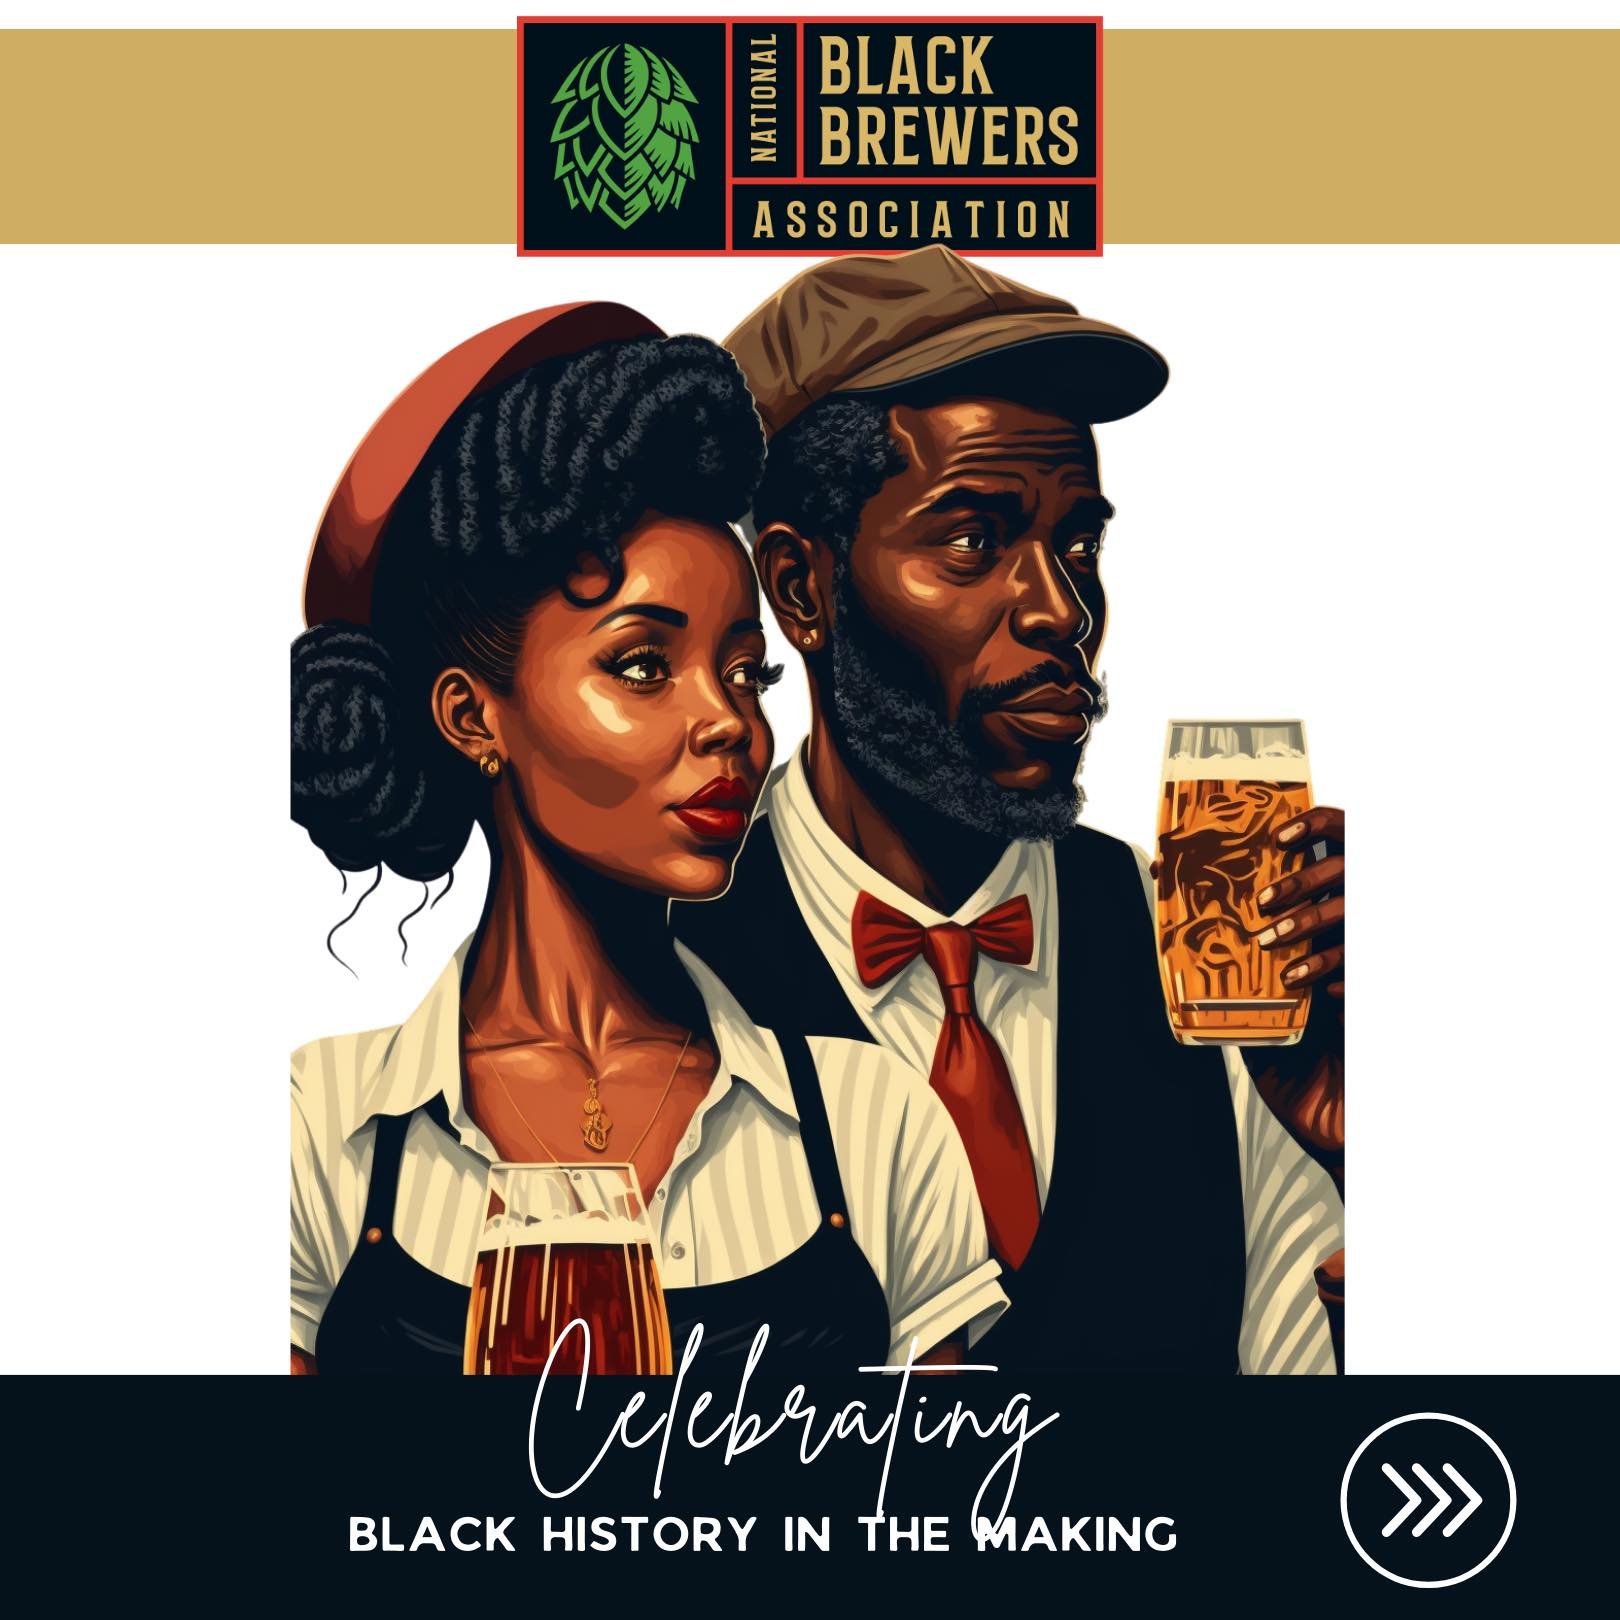 FIRSTEVER NATIONAL BLACK BREWERS ASSOCIATION LAUNCHED AT CRAFT BREWERS